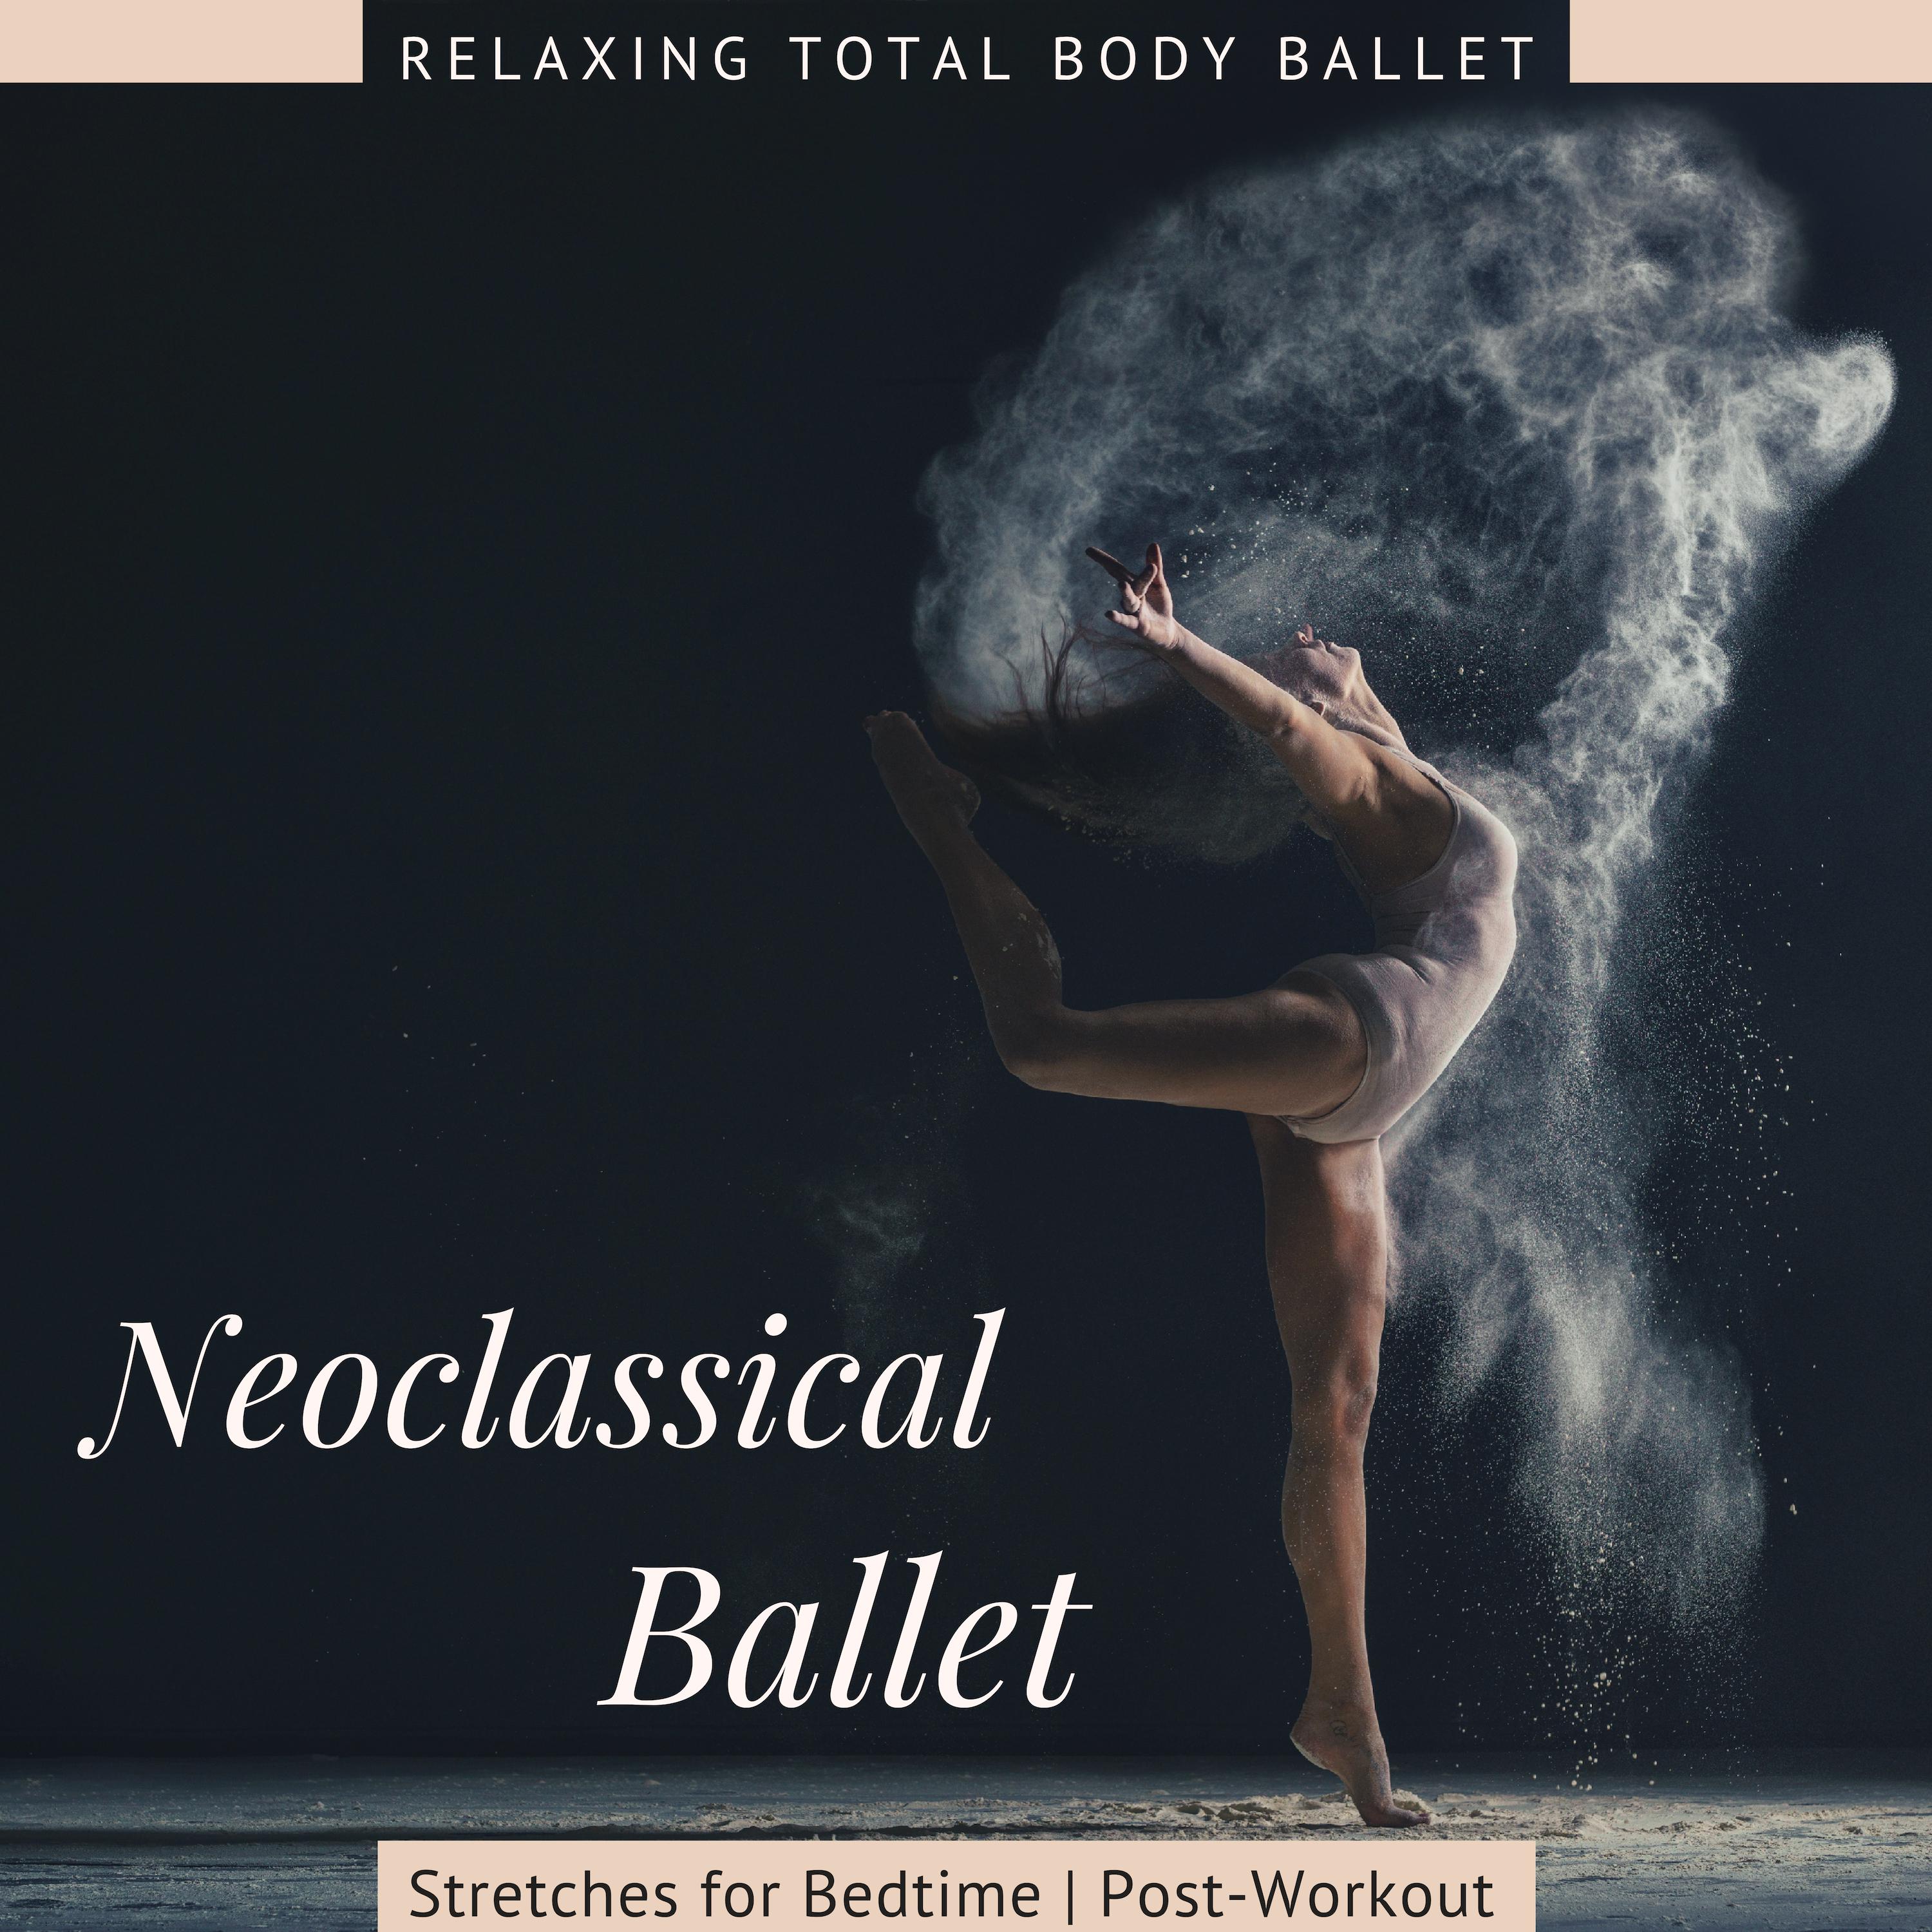 Neoclassical Ballet - Relaxing Total Body Ballet Stretches for Bedtime or Post-Workout